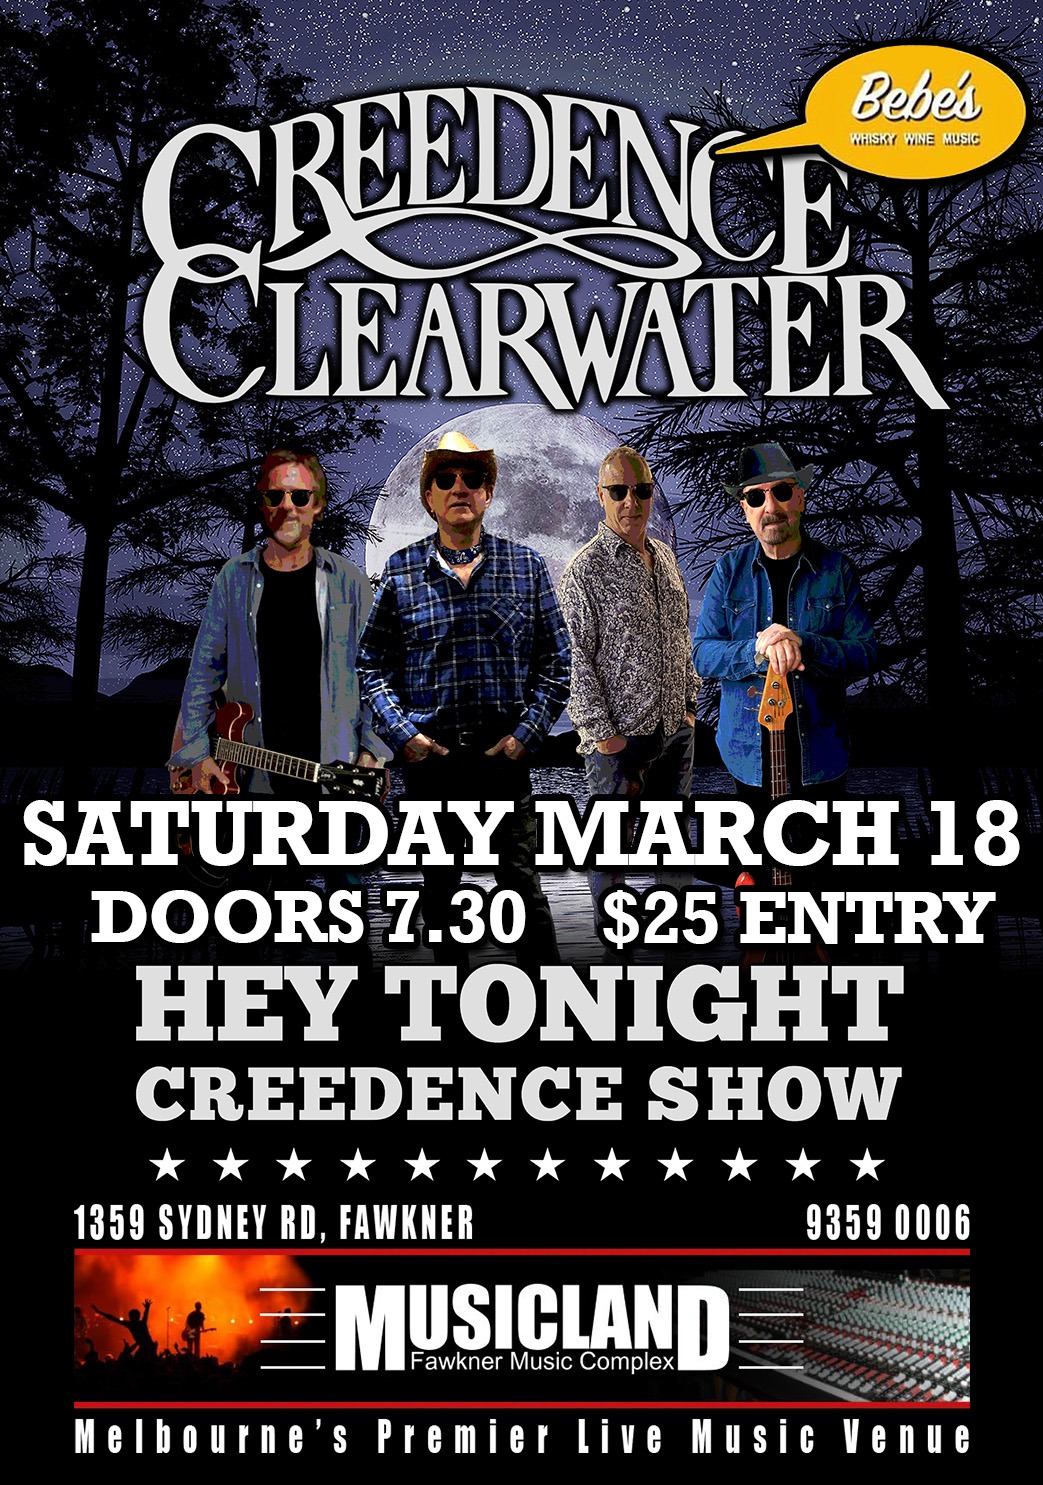 Hey Tonight Creedence Clearwater Tickets, Musicland Fawkner Complex